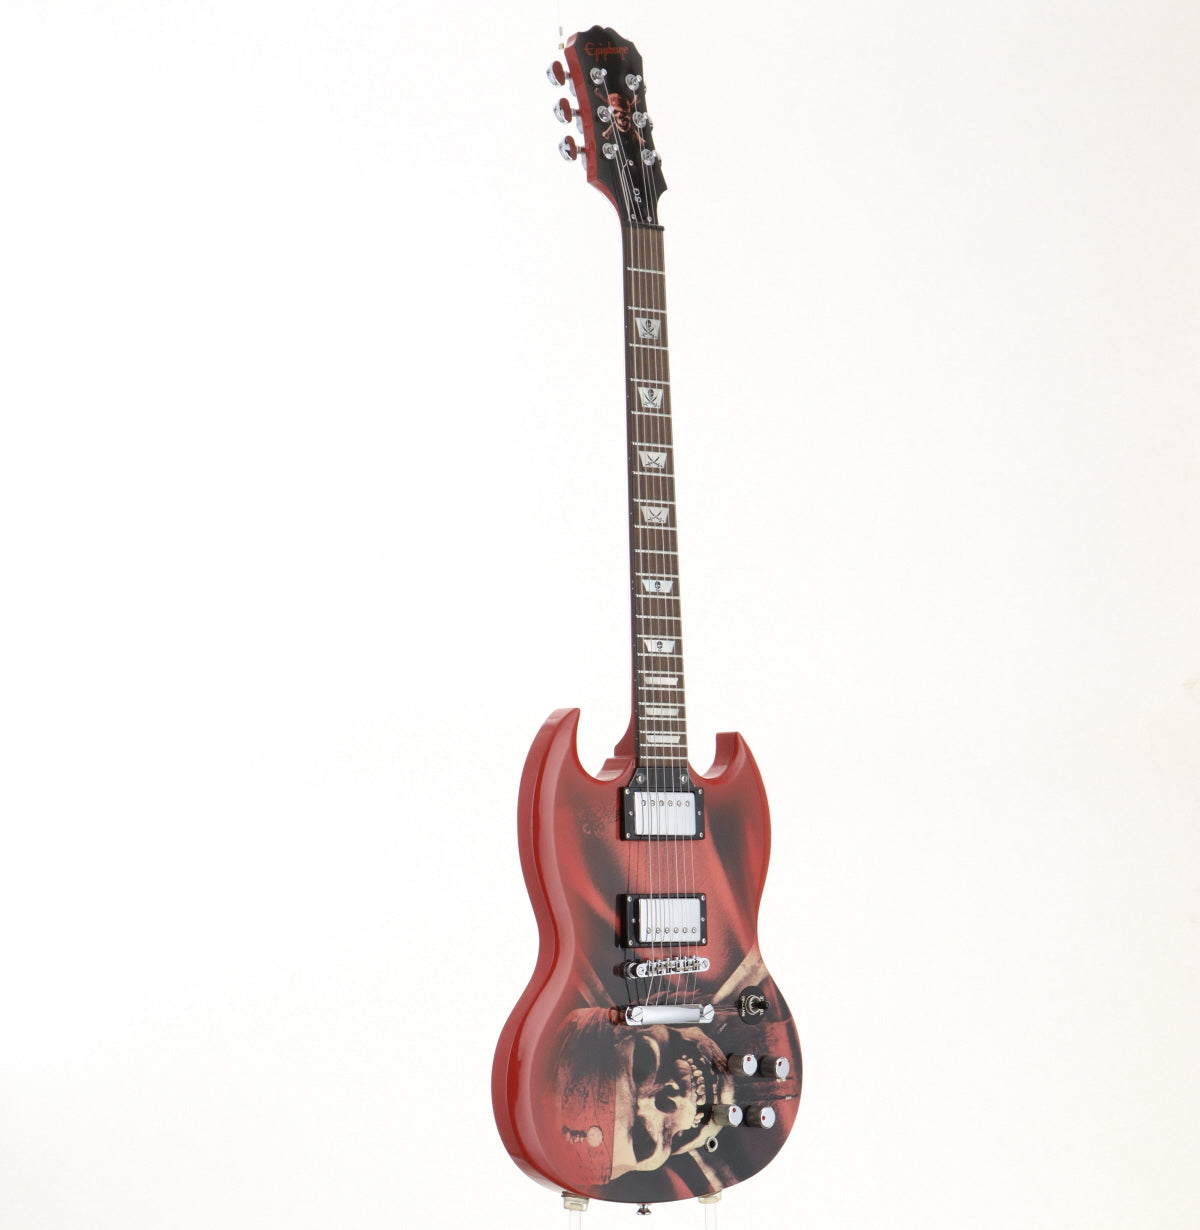 Epiphone Pirates of the Caribbean2006年製EEシリアル